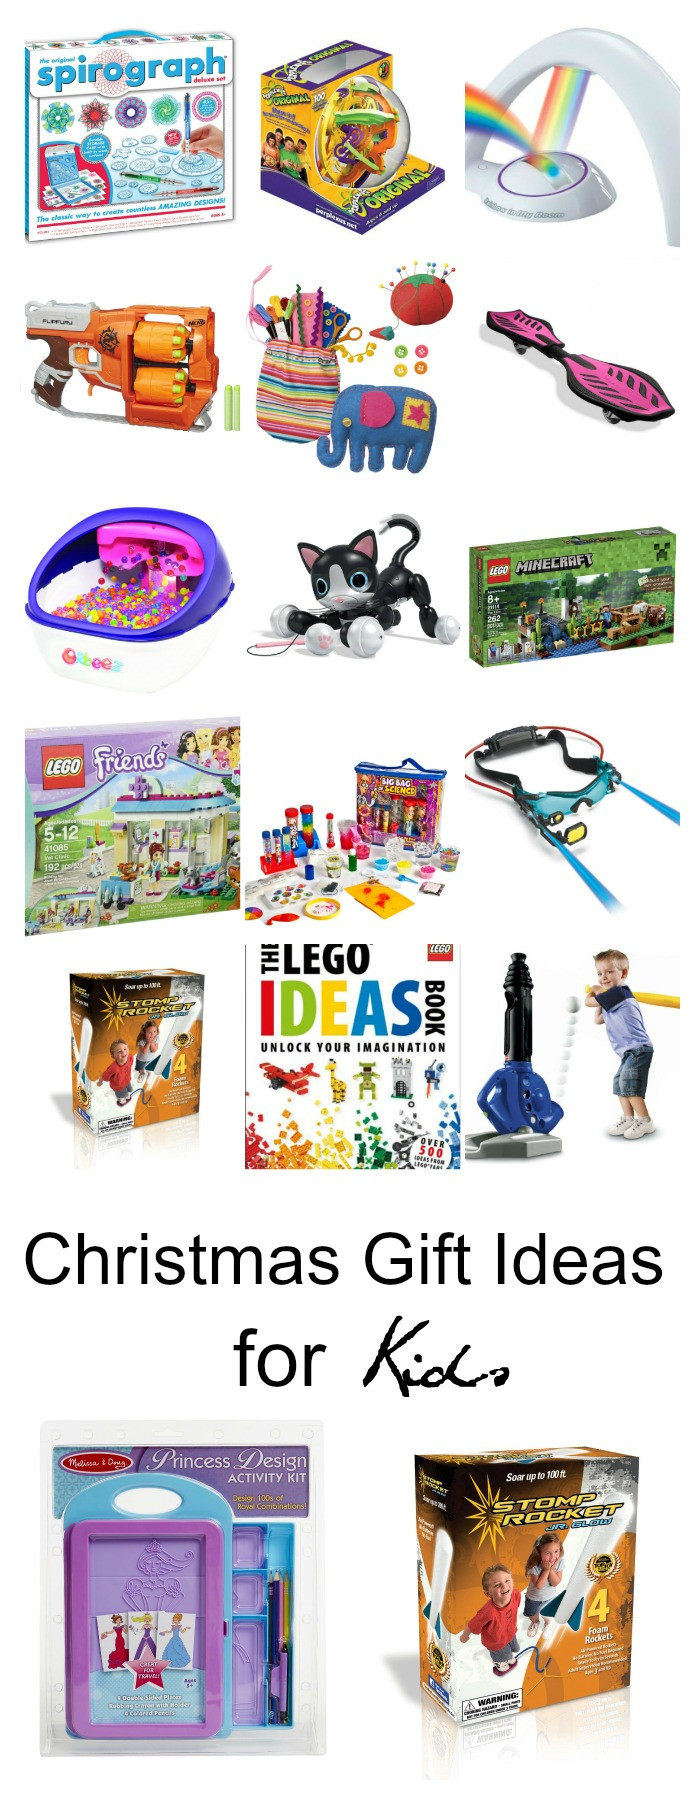 Christmas Gift Ideas For Toddlers
 Christmas Gift Ideas for Kids The Idea Room